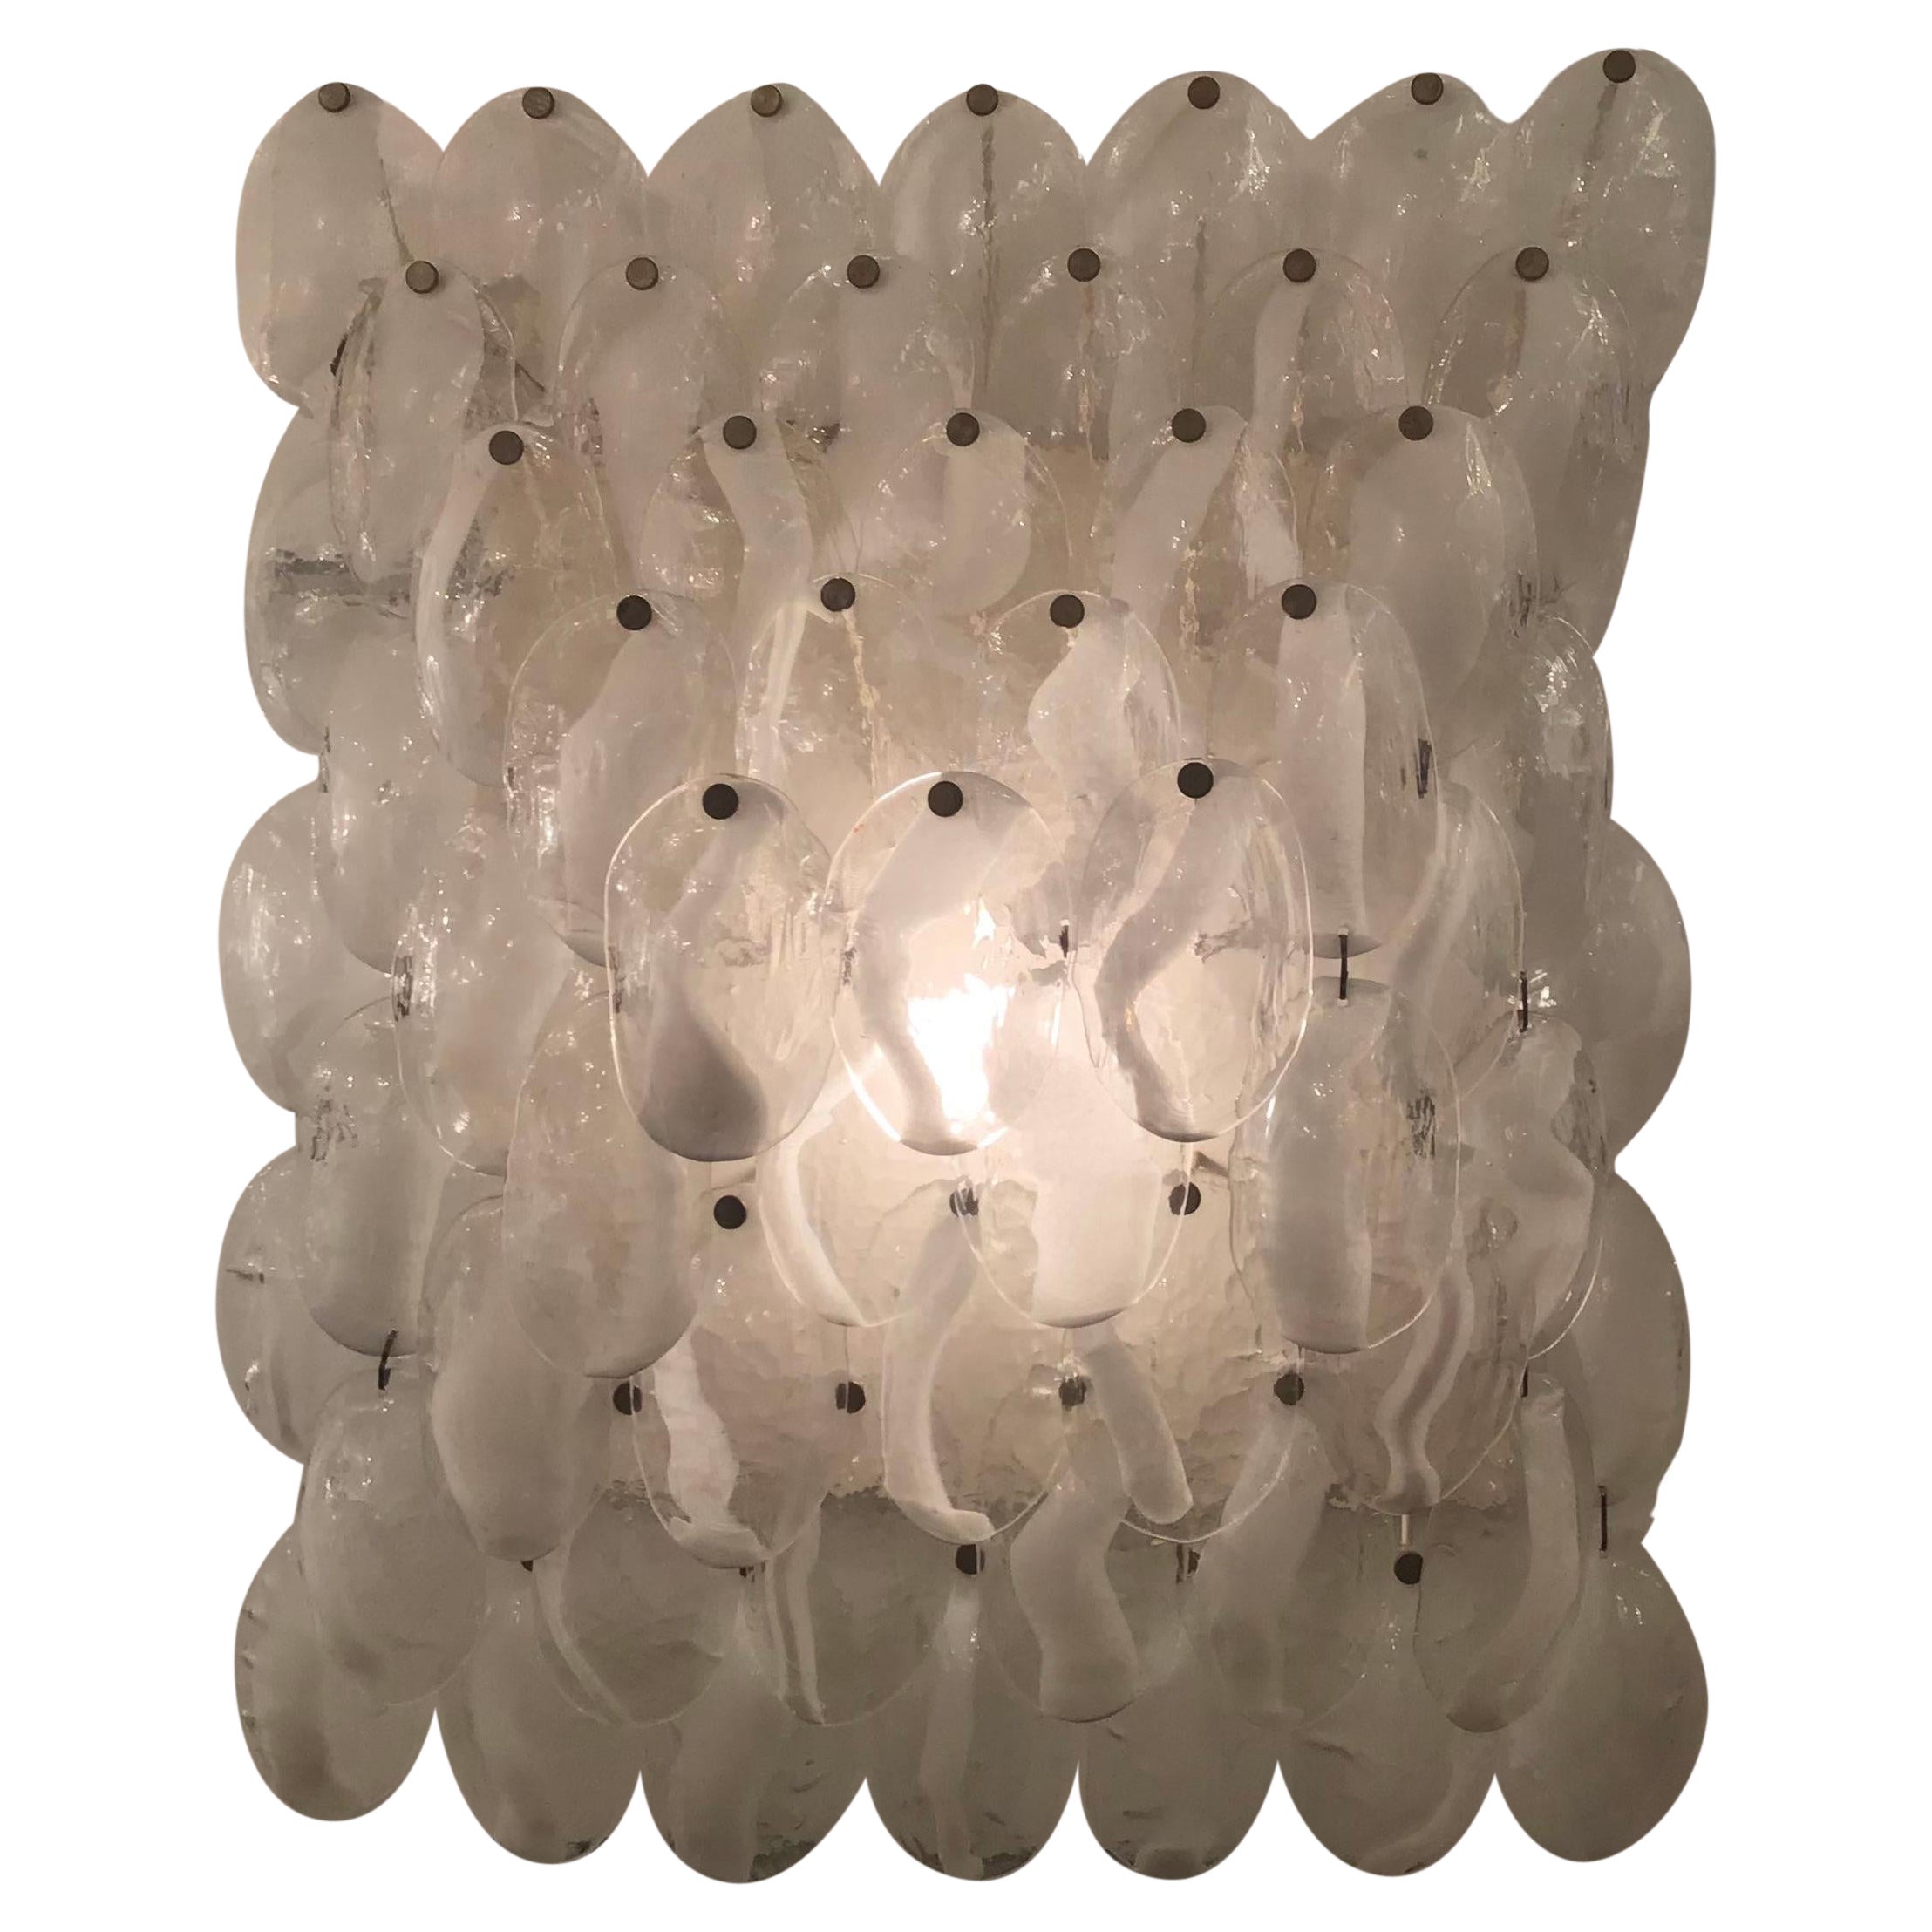 Mazzega Wall Light 1960, Murano Glass Iridescent White Transparent and Metal For Sale